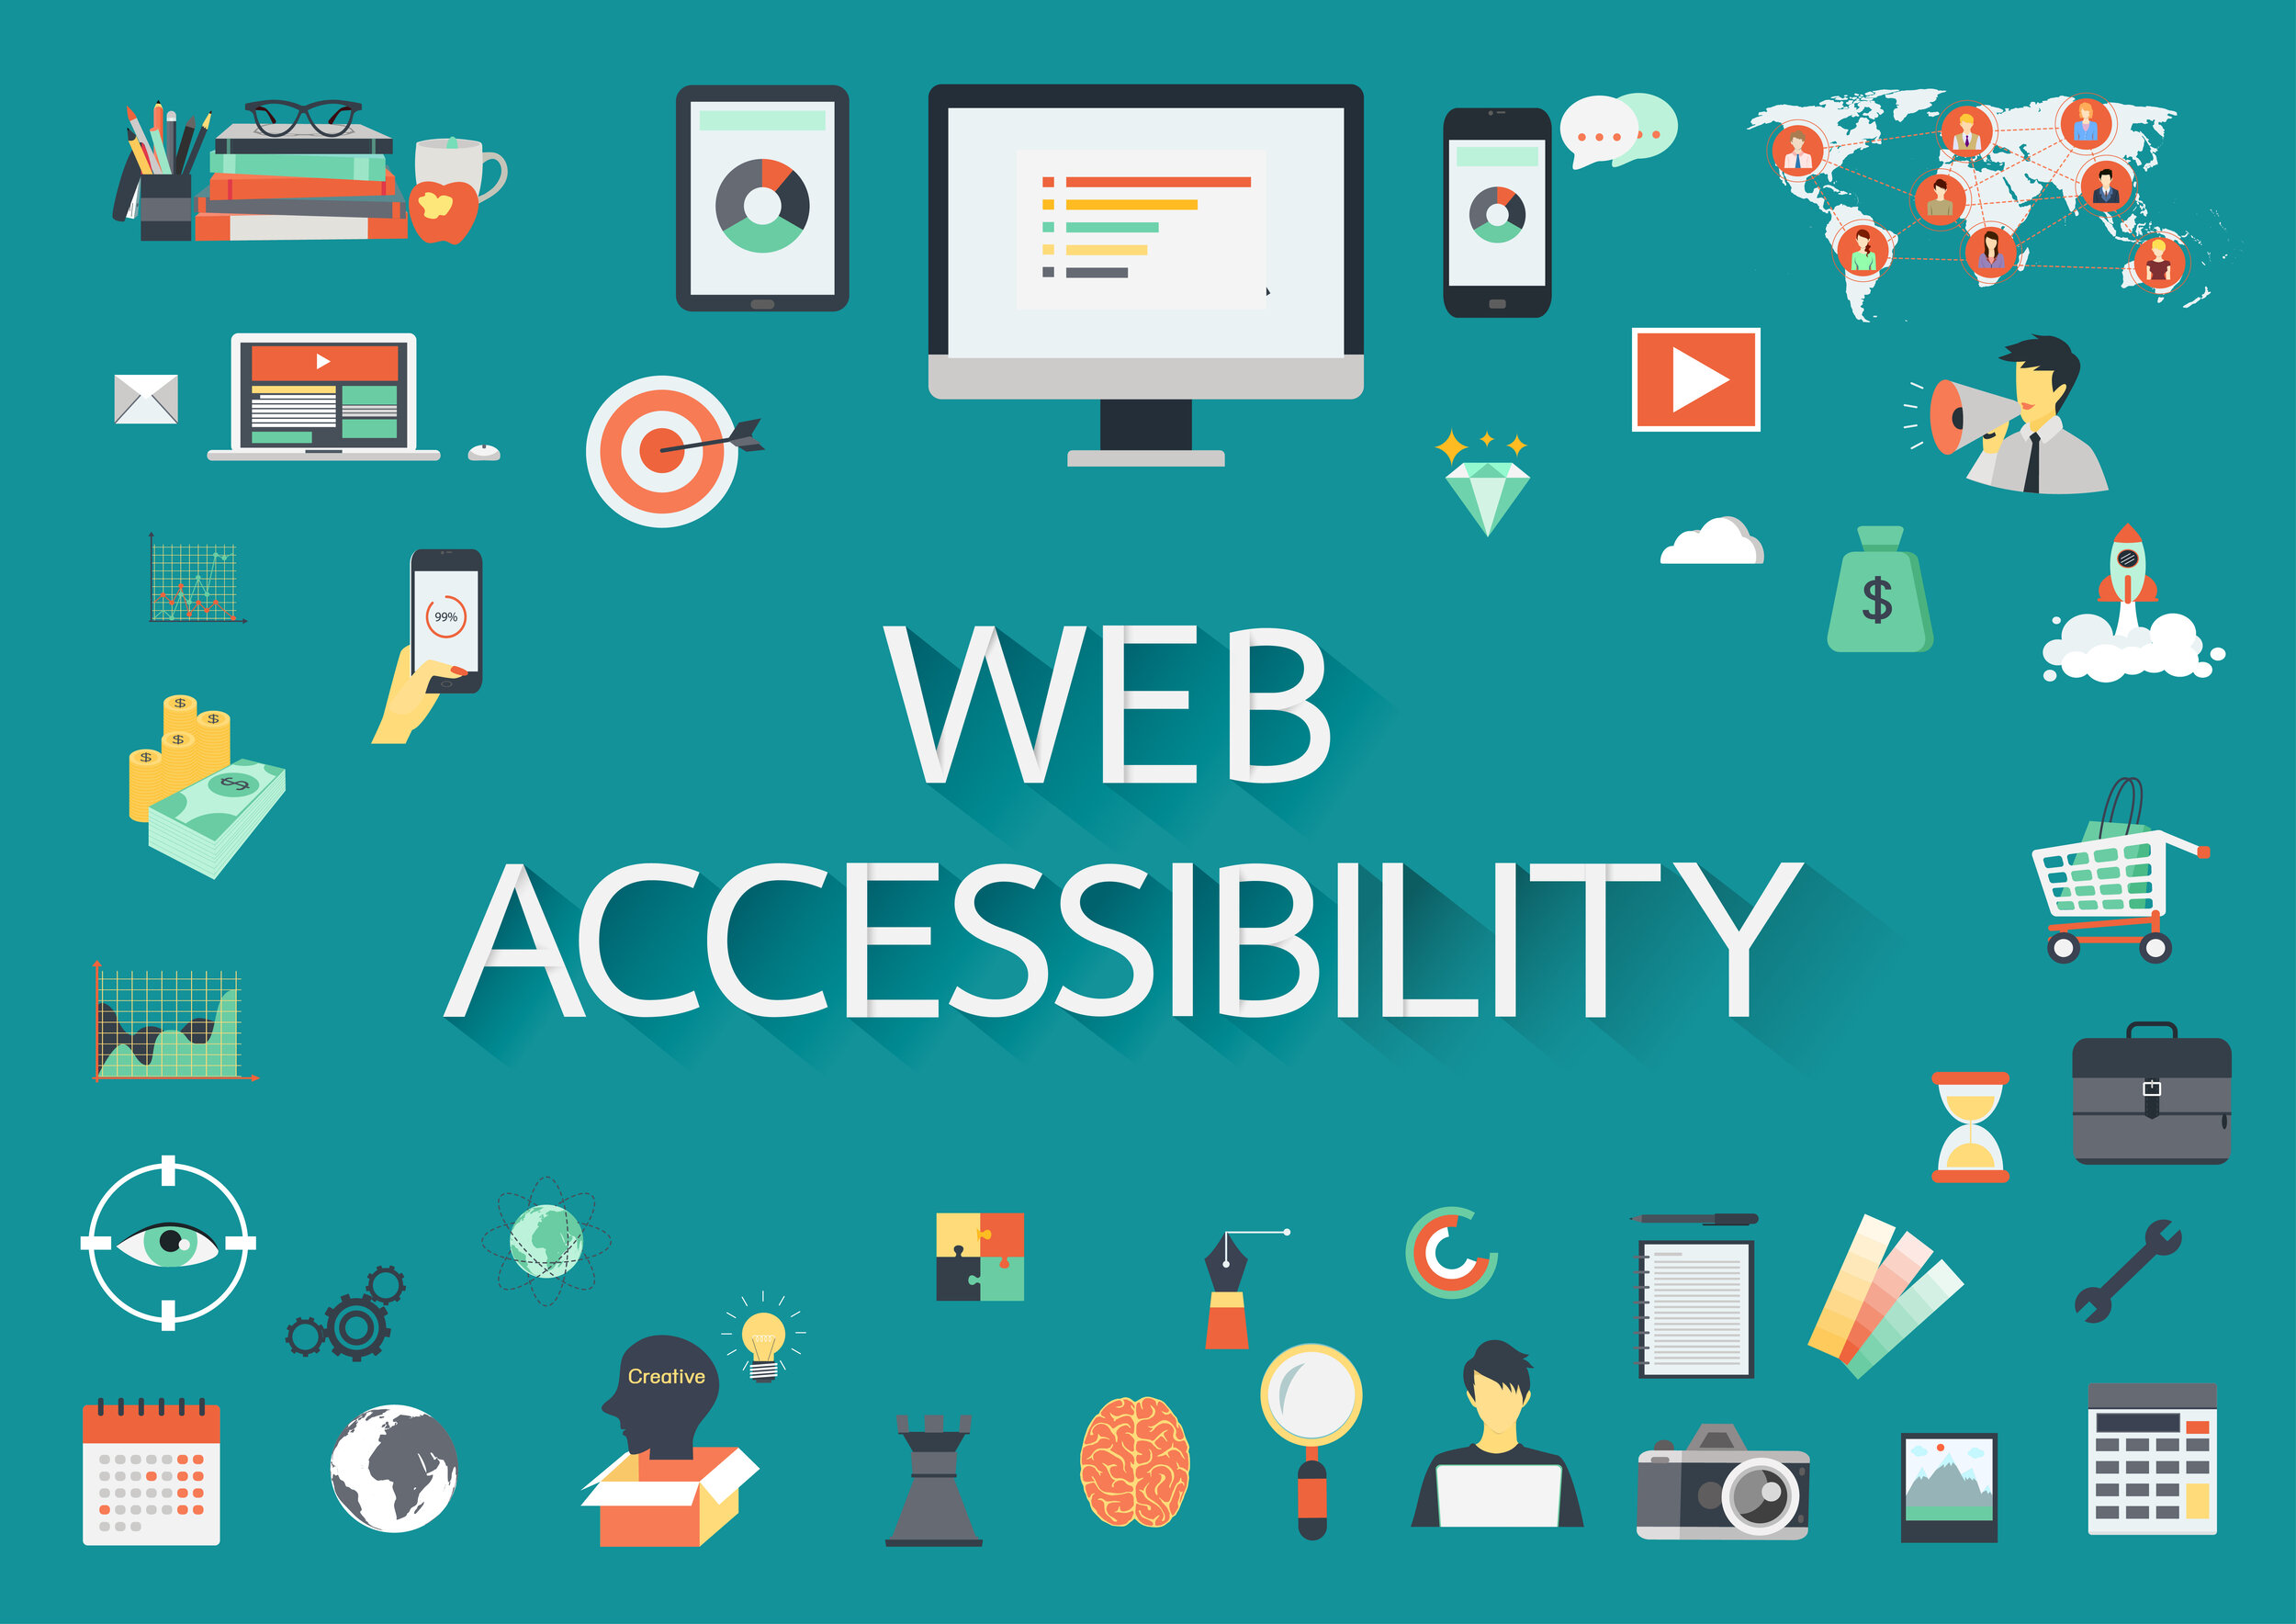 Accessibility Tools